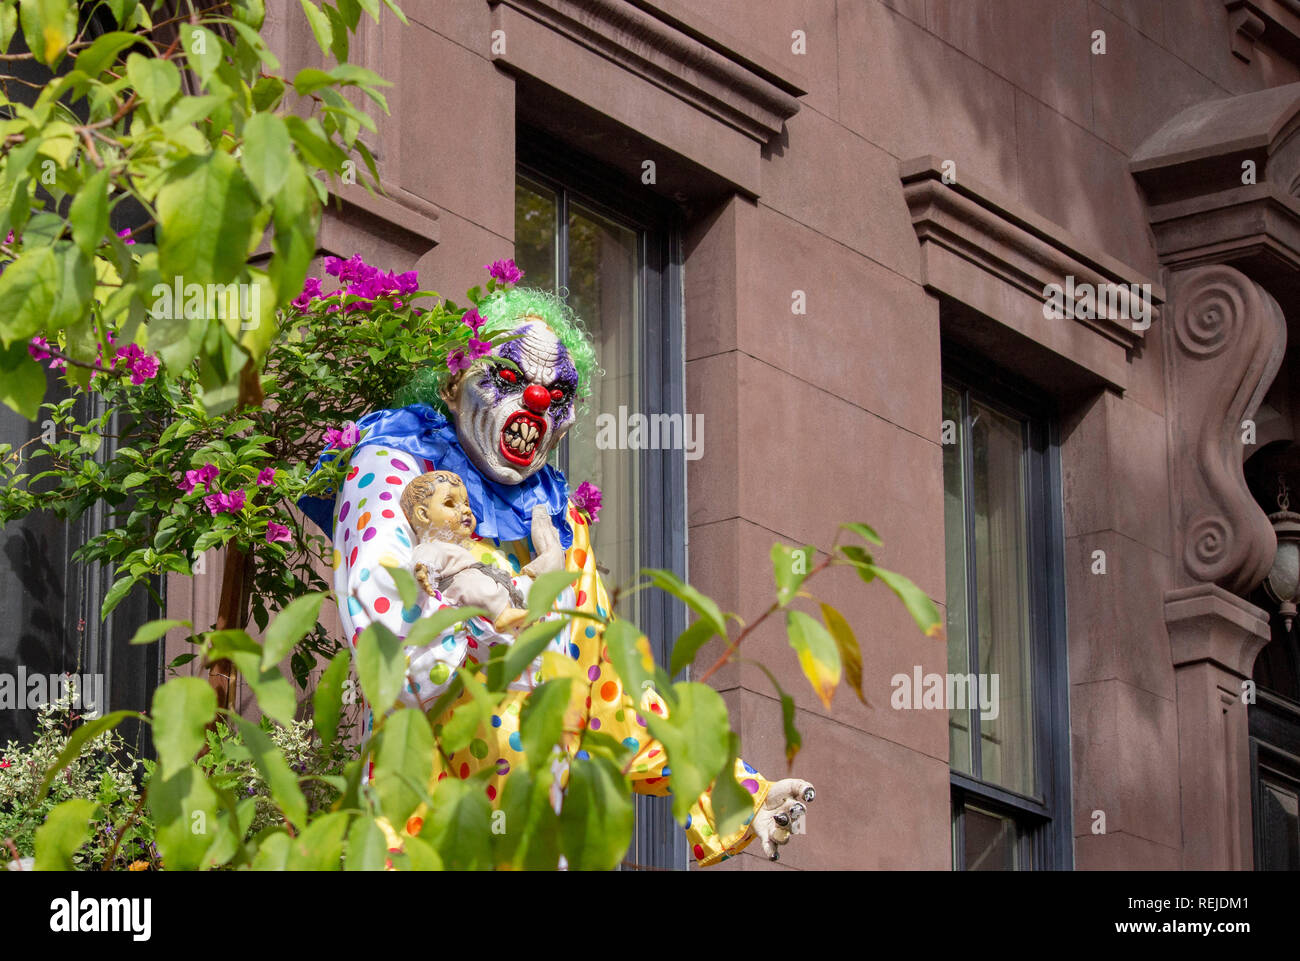 A scary clown mannequin on a staircase outside a house in New York City to celebrate Halloween Stock Photo